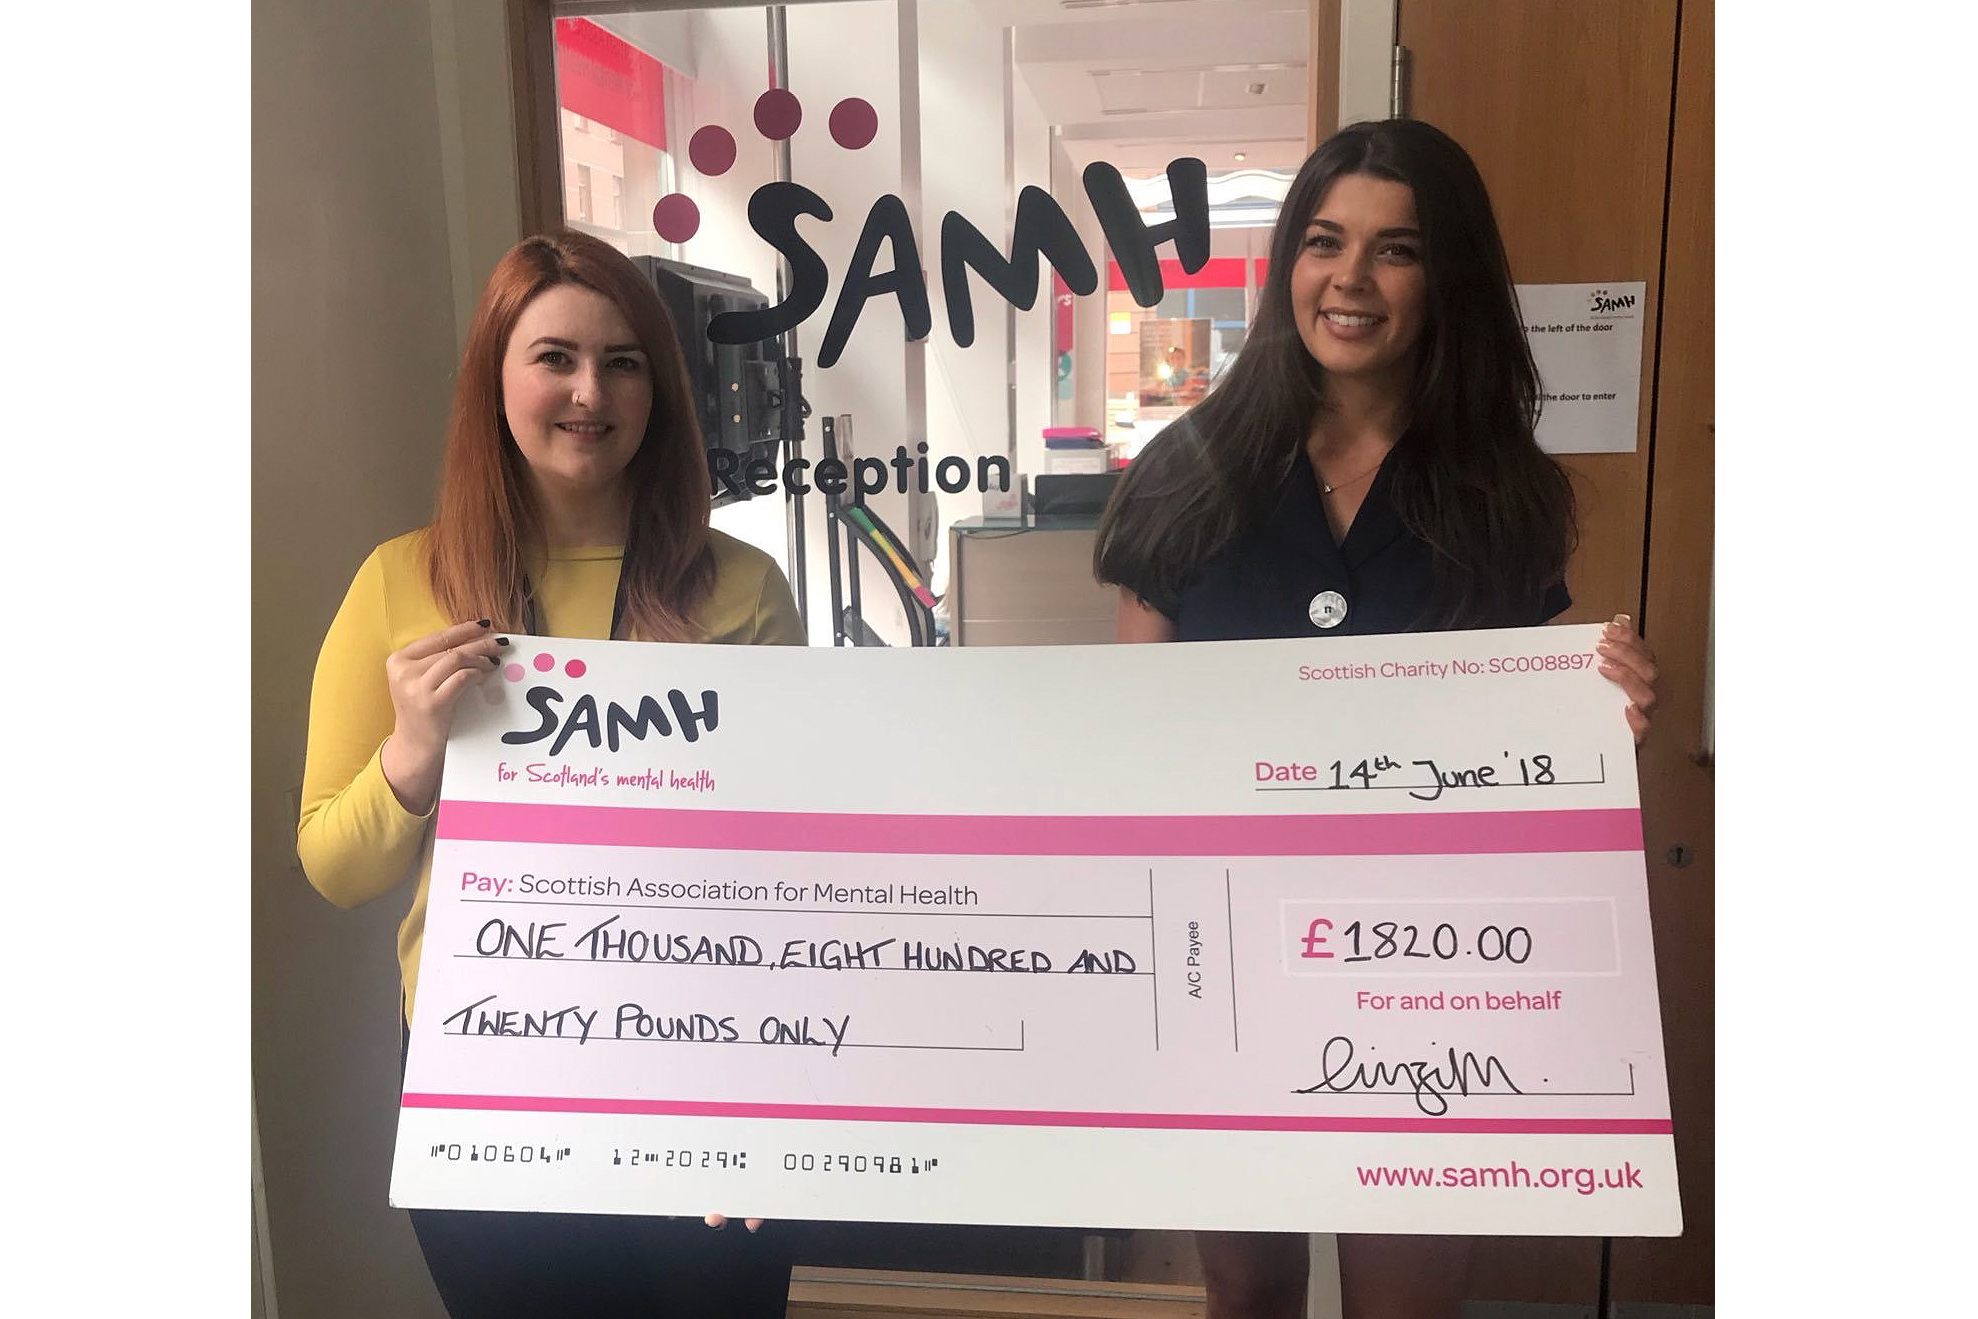 Miss Scotland Linzi McLelland presenting a cheque to the Scottish Association for Mental Health (SAMH) earlier this year